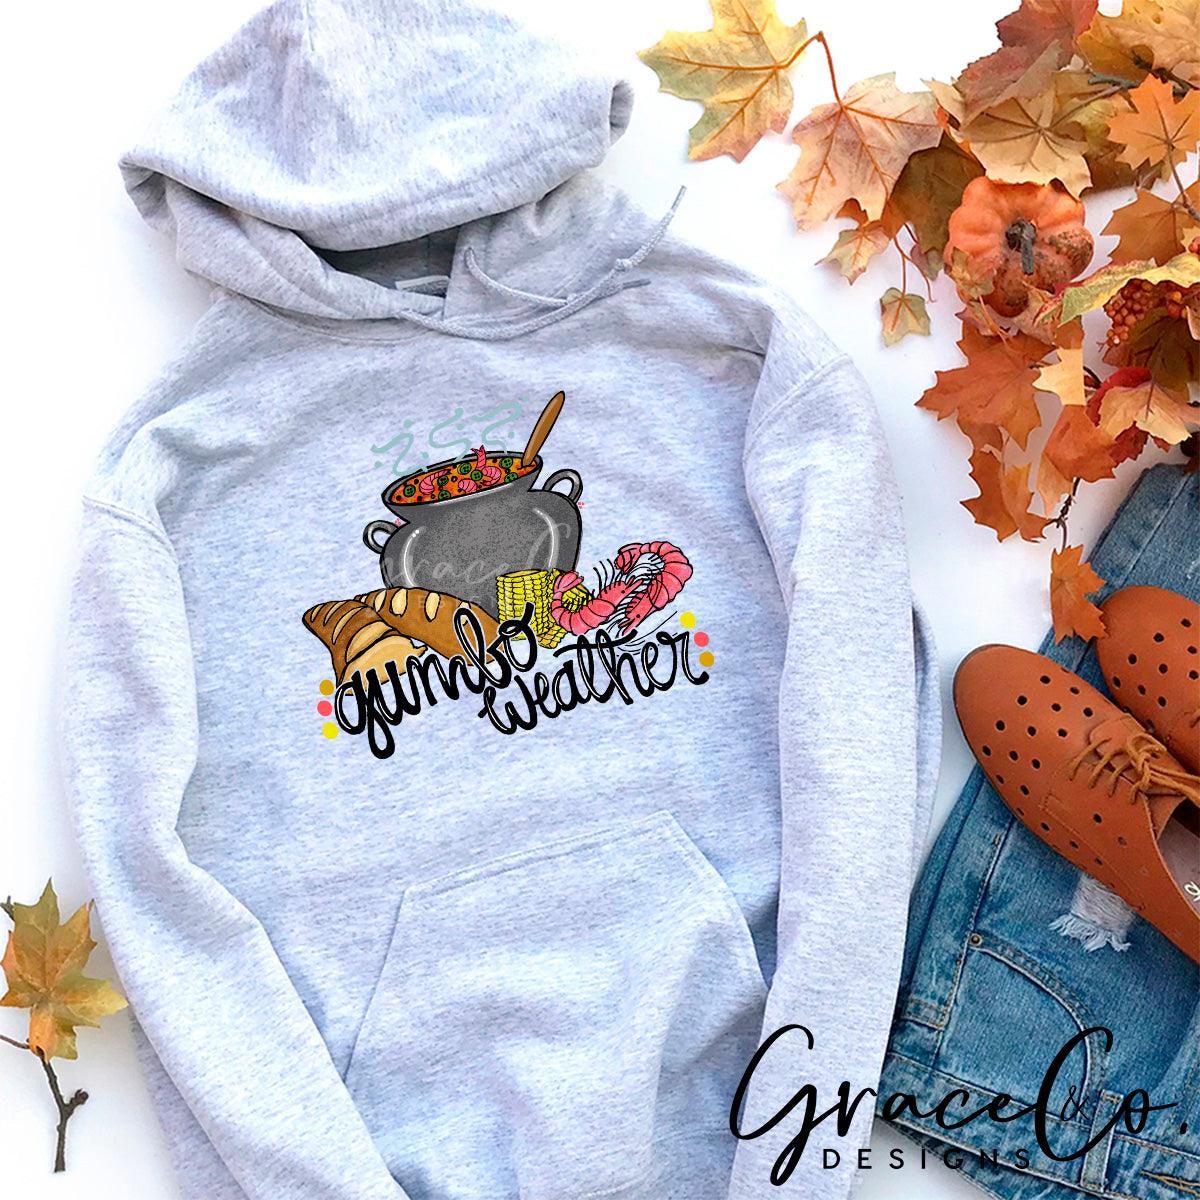 Gumbo Weather - Grace & Co. Designs 